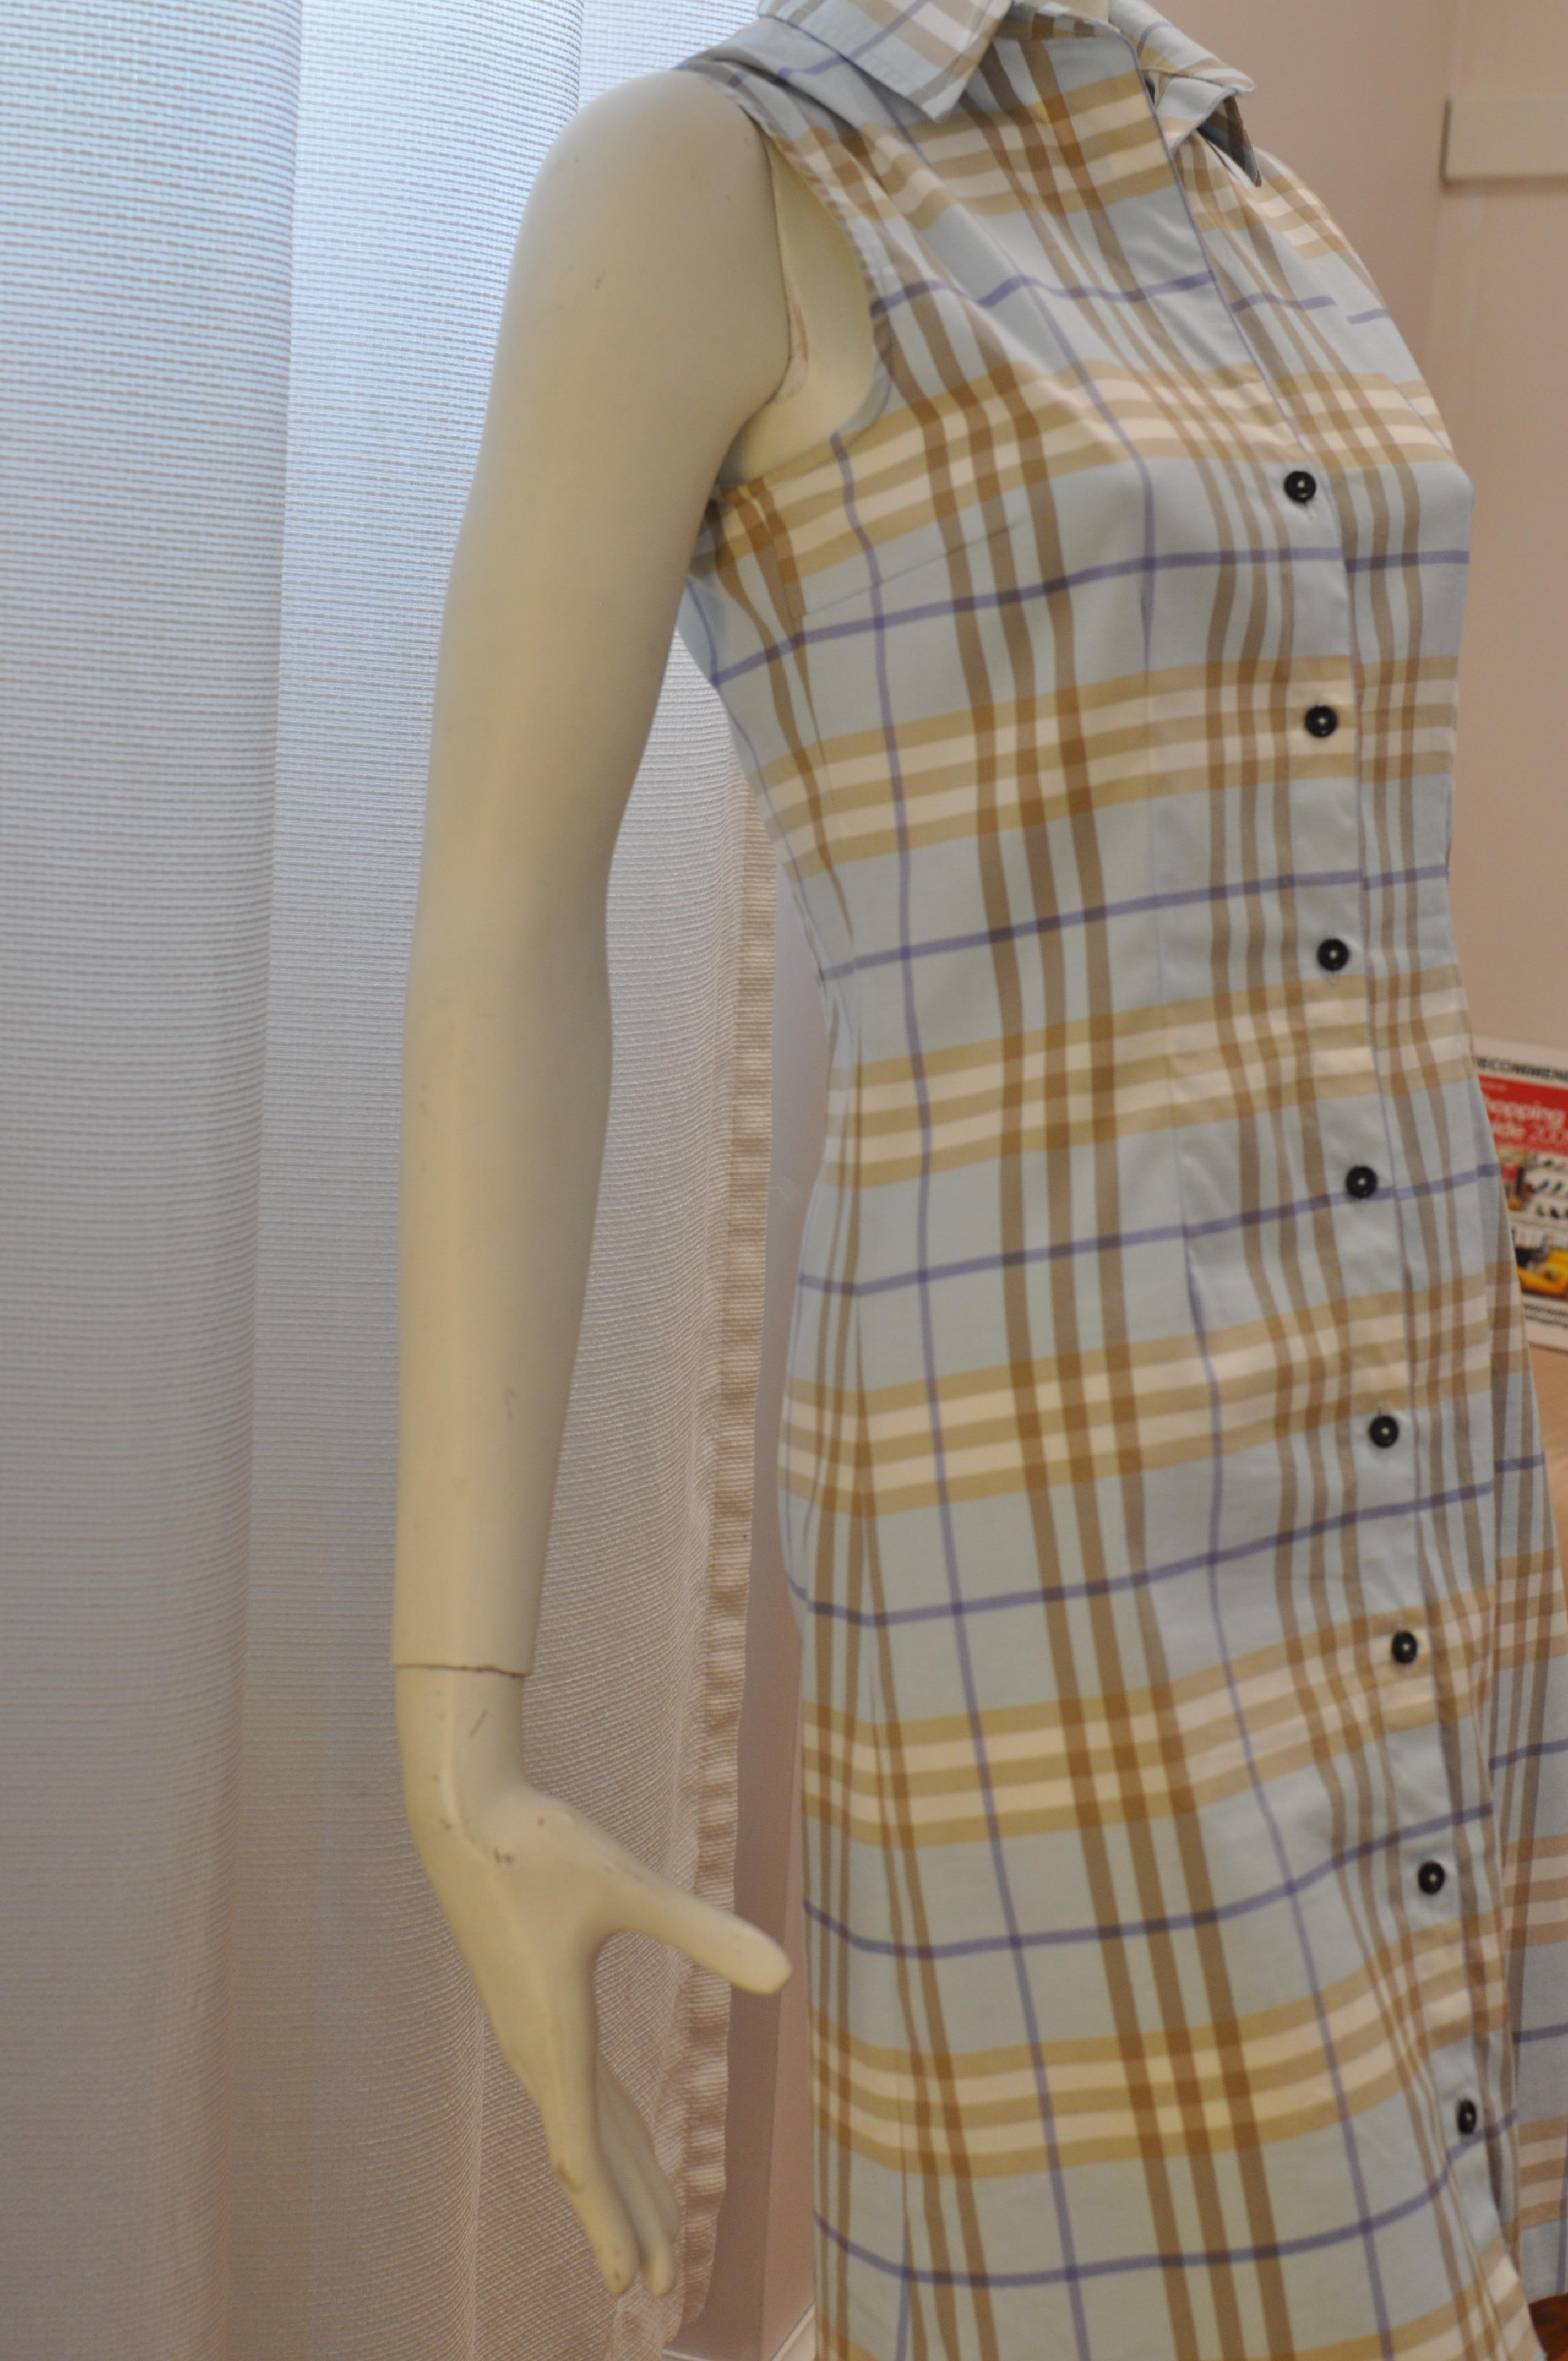 This is a blue beige nova check cotton blend sleeveless shirt dress. Such an easy dress to wear with sandals or add some nice shoes and sparkle and wear it in the evening.

